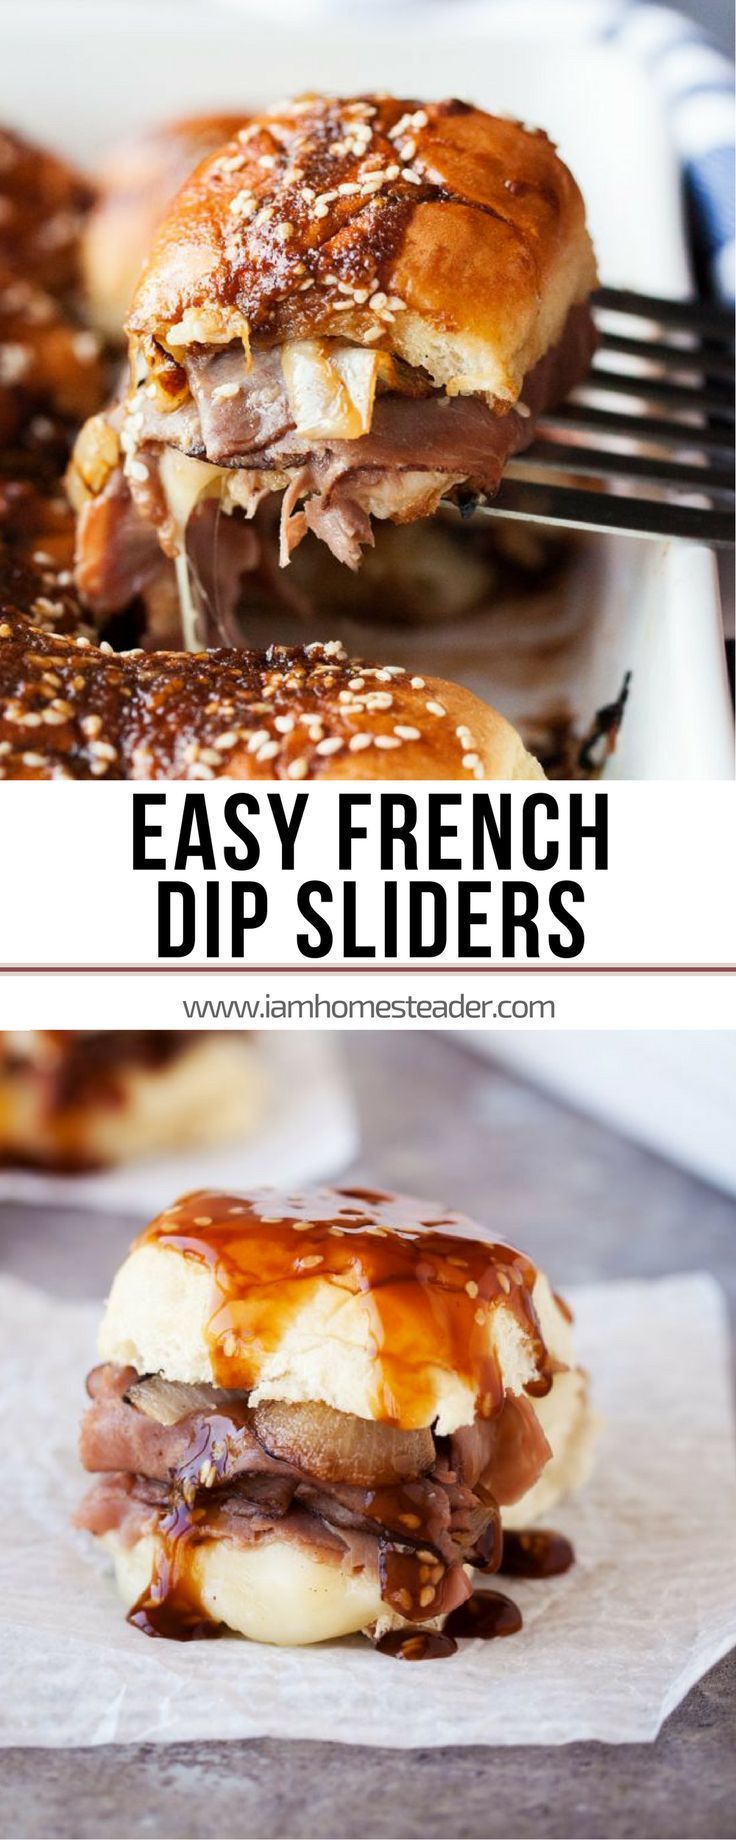 EASY FRENCH DIP SLIDERS - Soft rolls with a savory sauce, melted cheese, tender beef, and caramelized onions. Simple and yummy meal you can make at home for your family! Check us out @iamhomesteader for more healthy homemade cooking and easy dinner recipe -   25 shaved beef recipes
 ideas